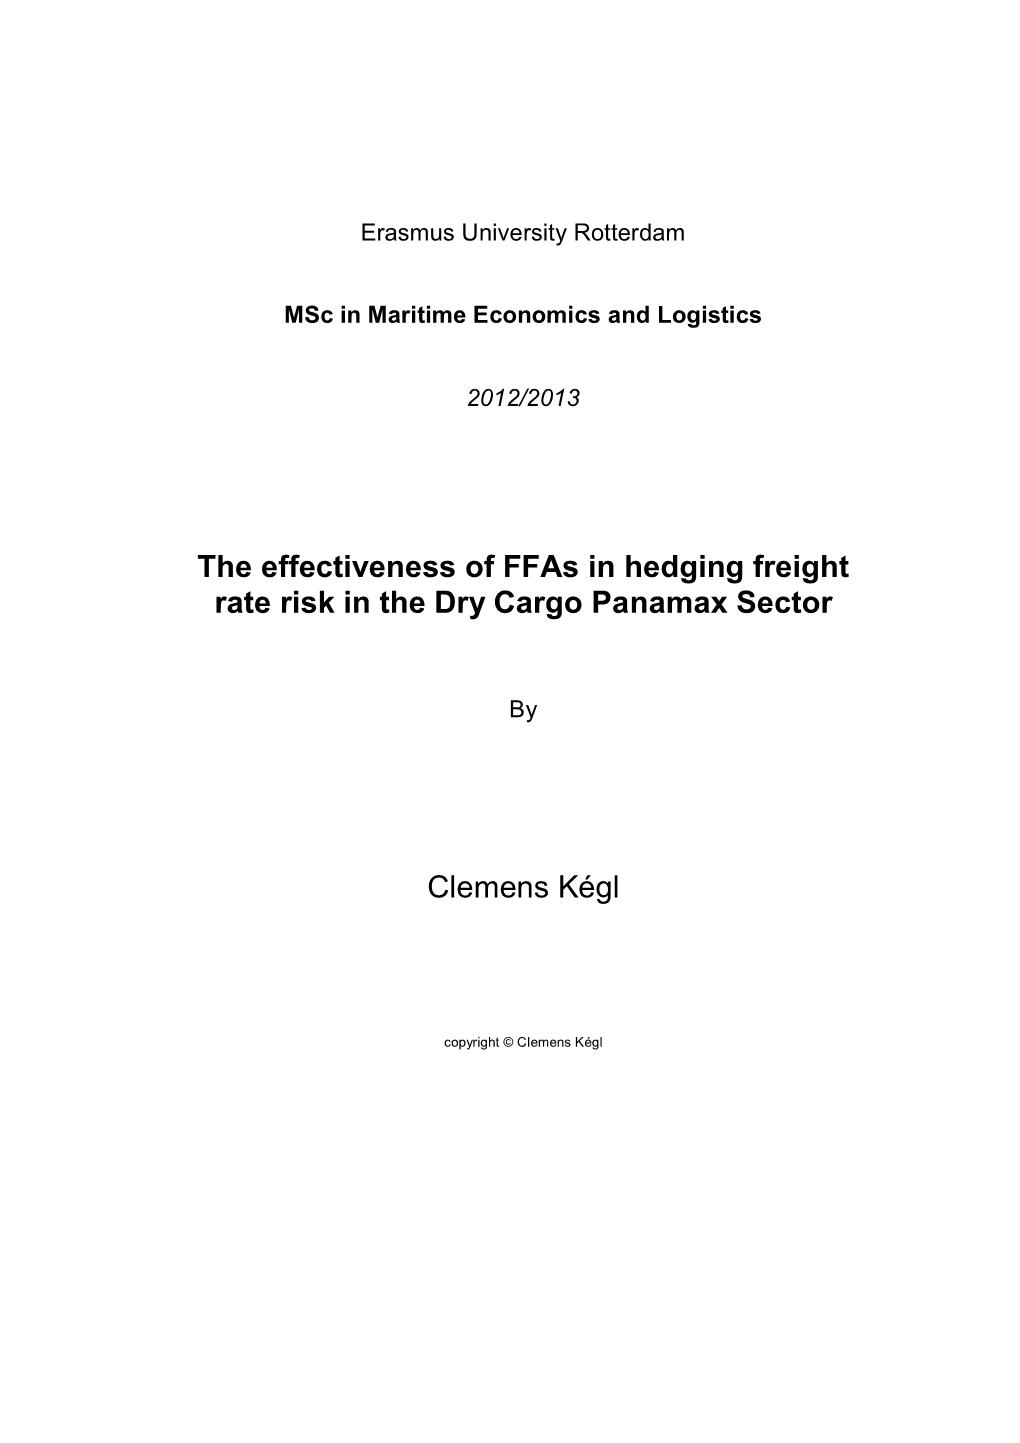 The Effectiveness of Ffas in Hedging Freight Rate Risk in the Dry Cargo Panamax Sector